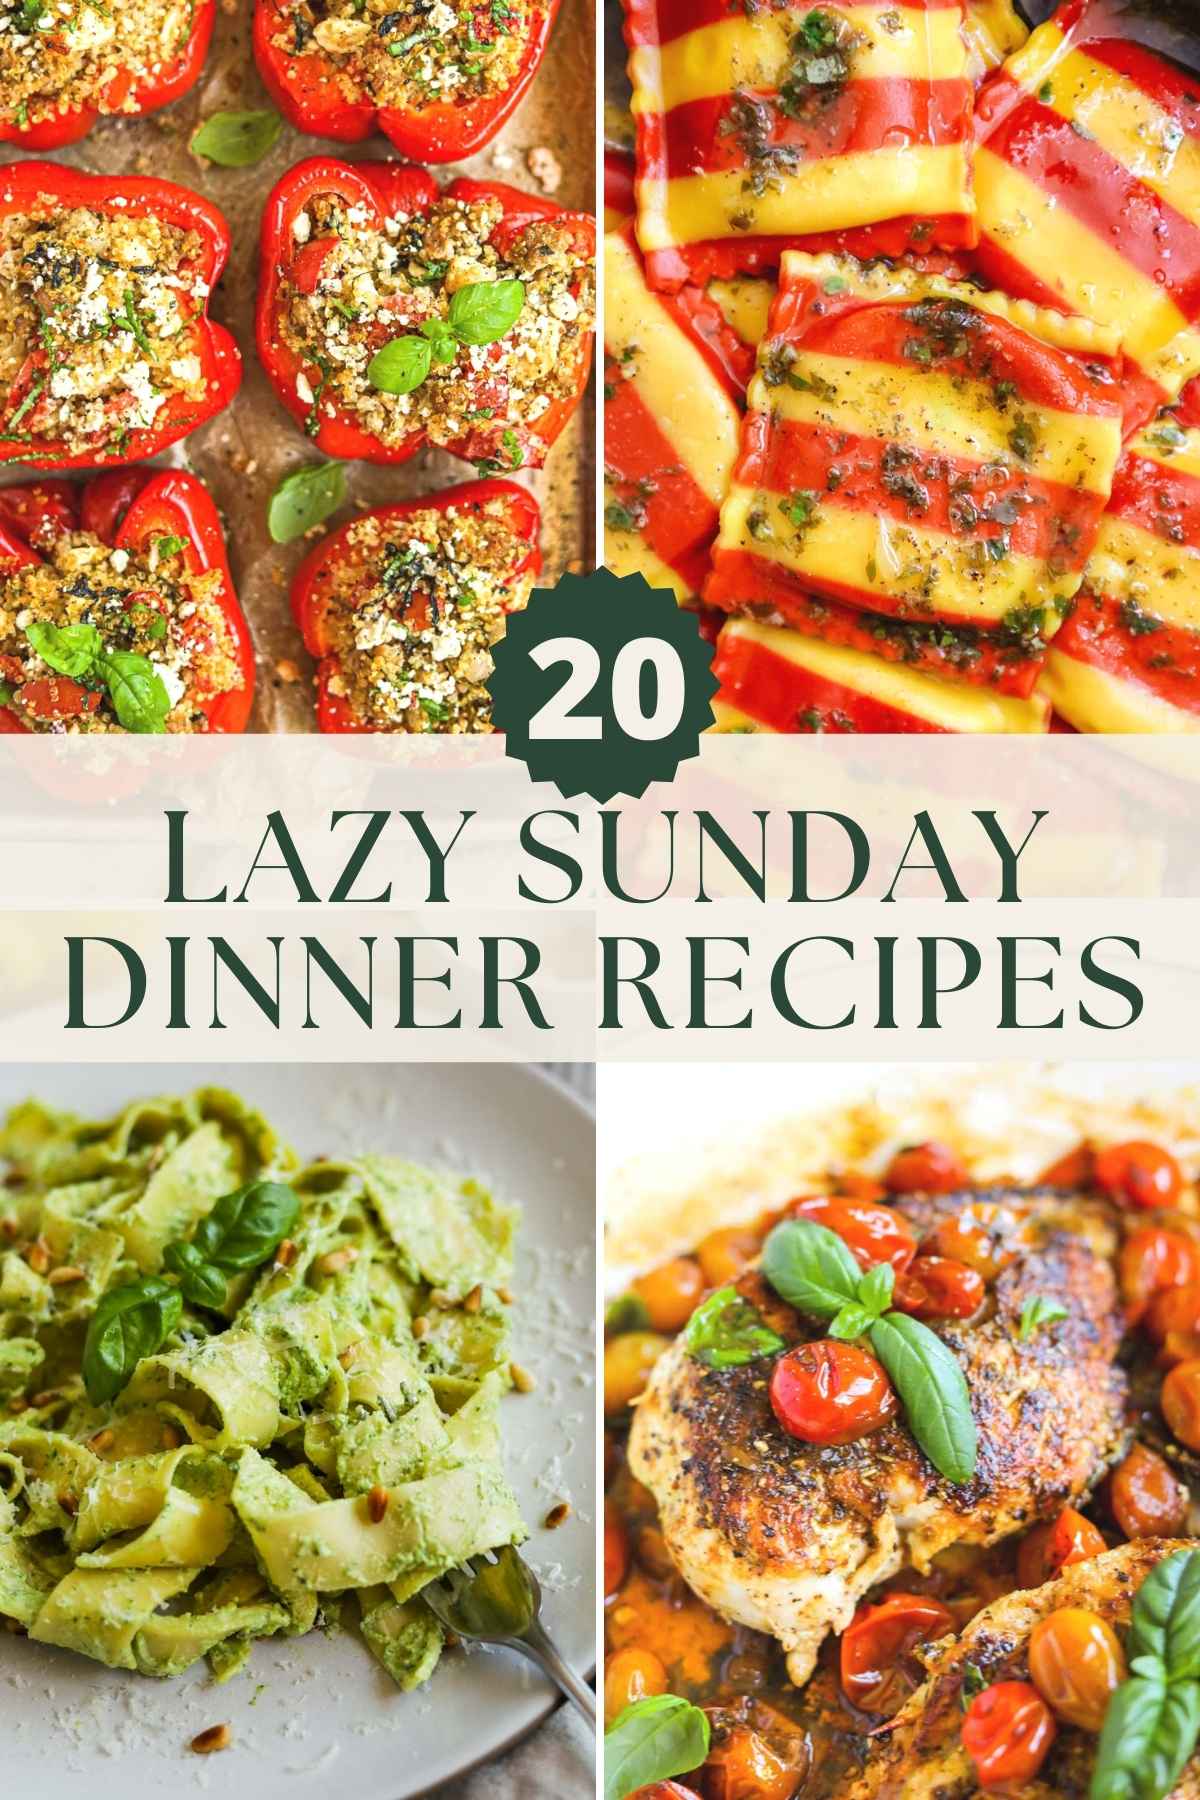 20 lazy Sunday recipes, including lobster ravioli with a browned butter lemon sauce, creamy pesto pasta, mozzarella-stuffed chicken with tomatoes, and turkey quinoa-stuffed peppers.